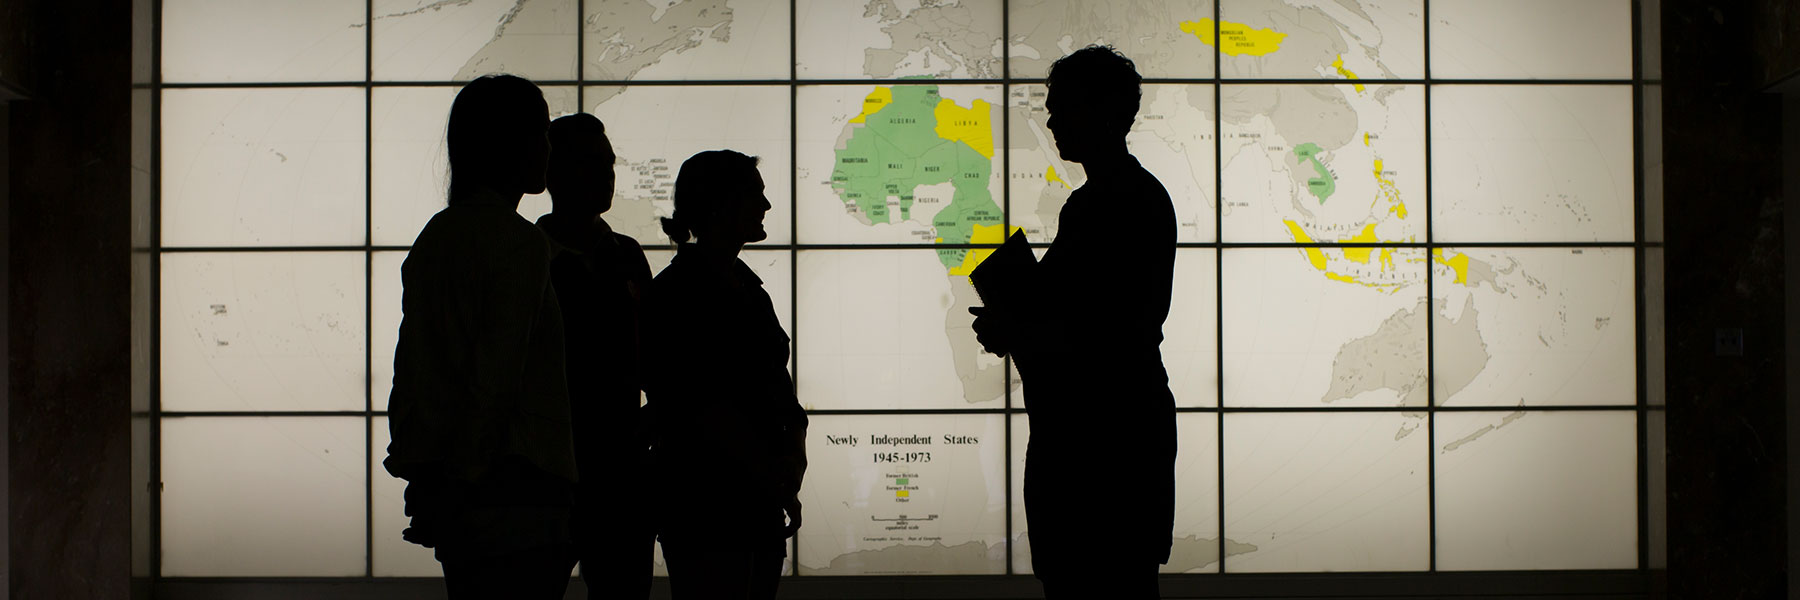 People silhouetted in front of a world map